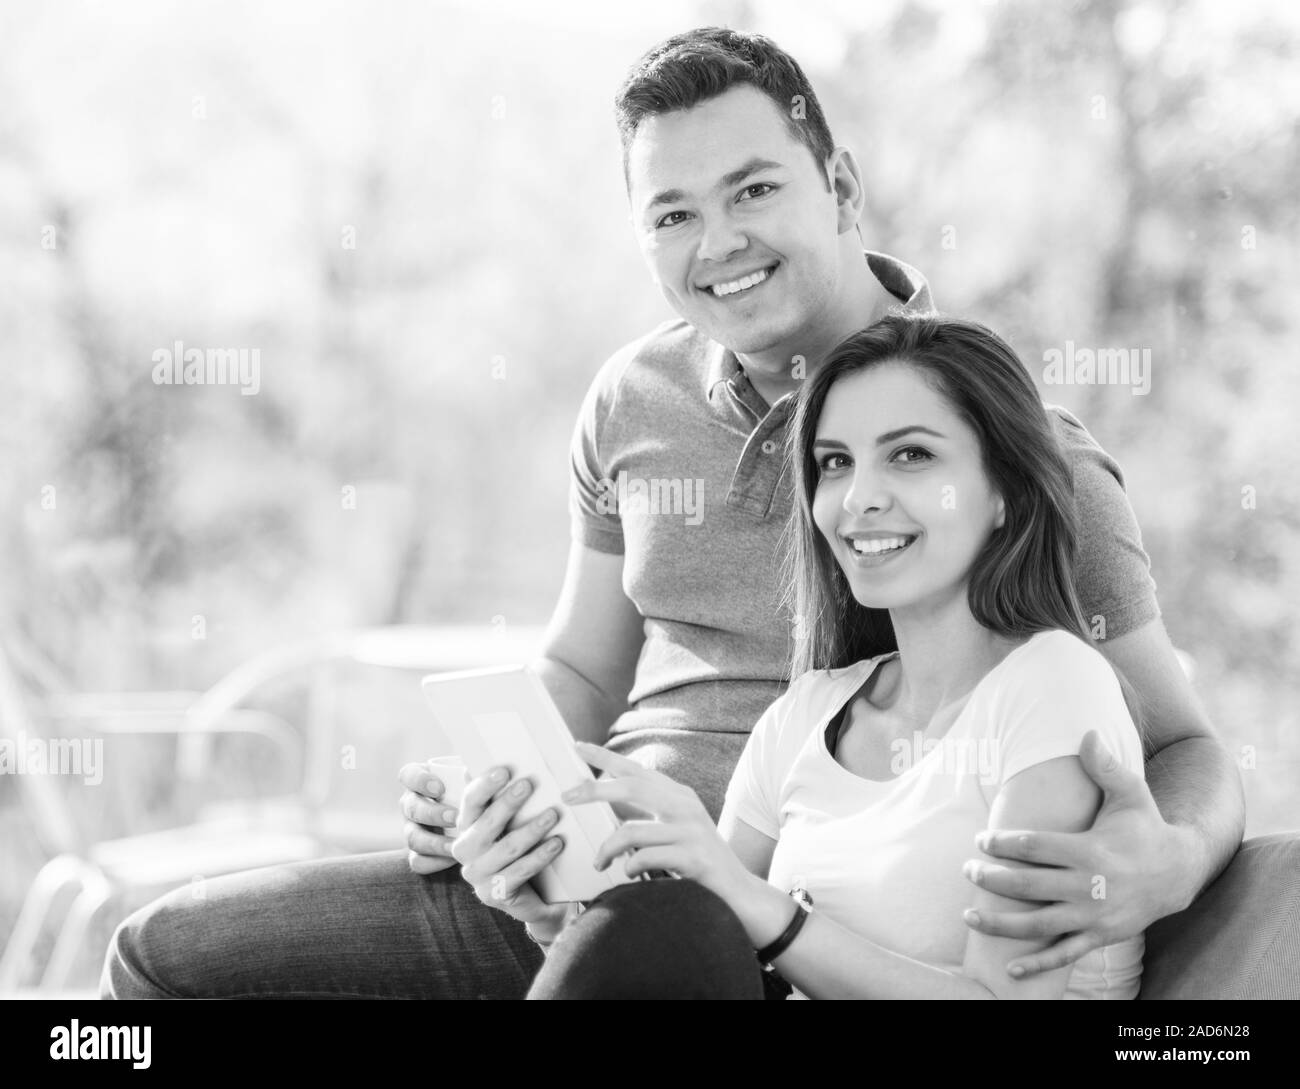 Two cheerful lovers sitting on the couch Stock Photo